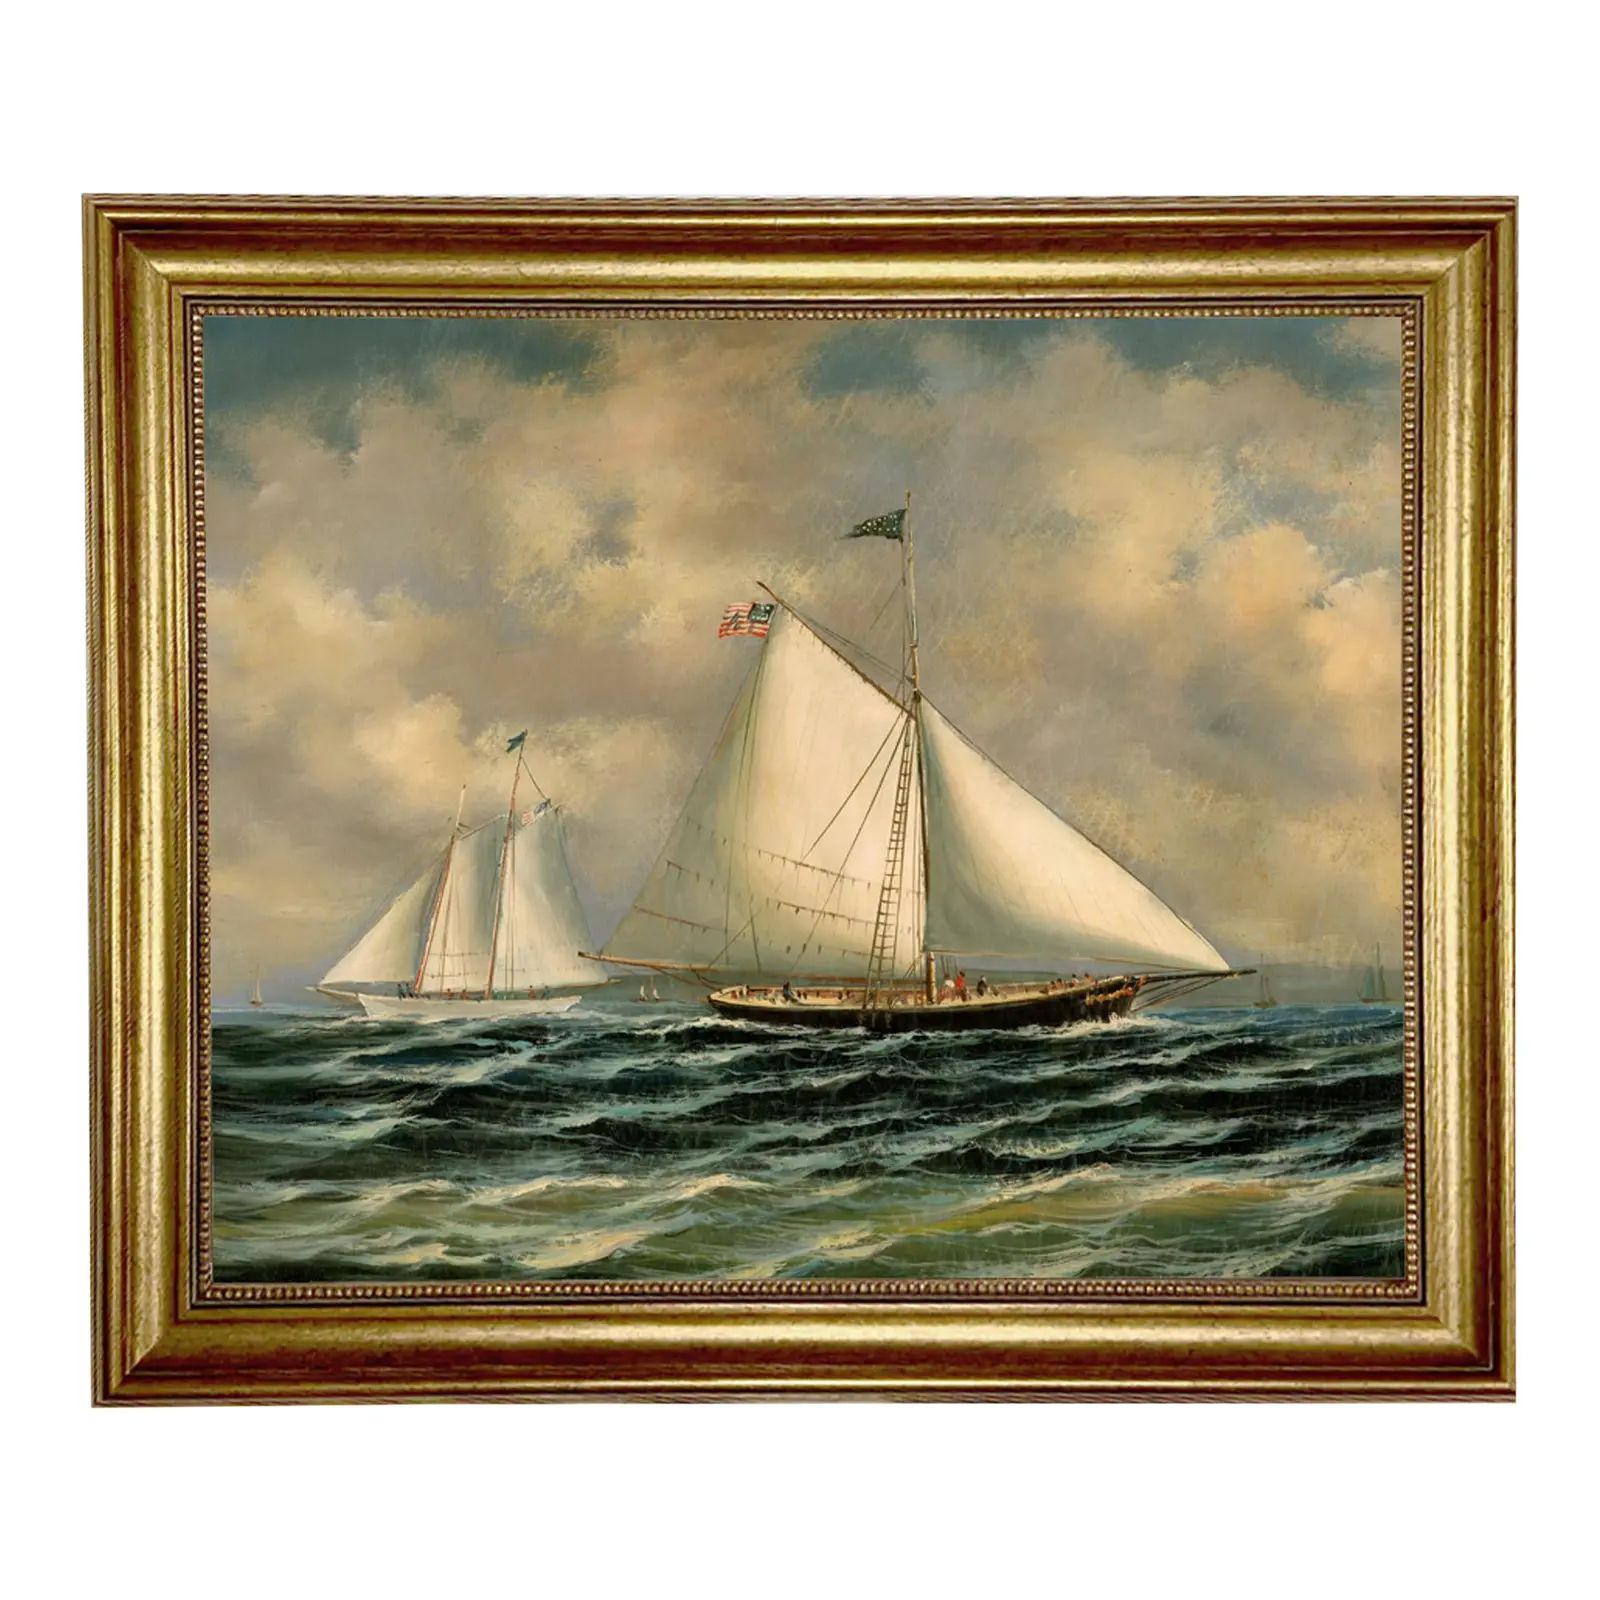 1851 Sloop Maria Racing America Framed Oil Painting Print on Canvas in Antiqued Gold Frame | Chairish